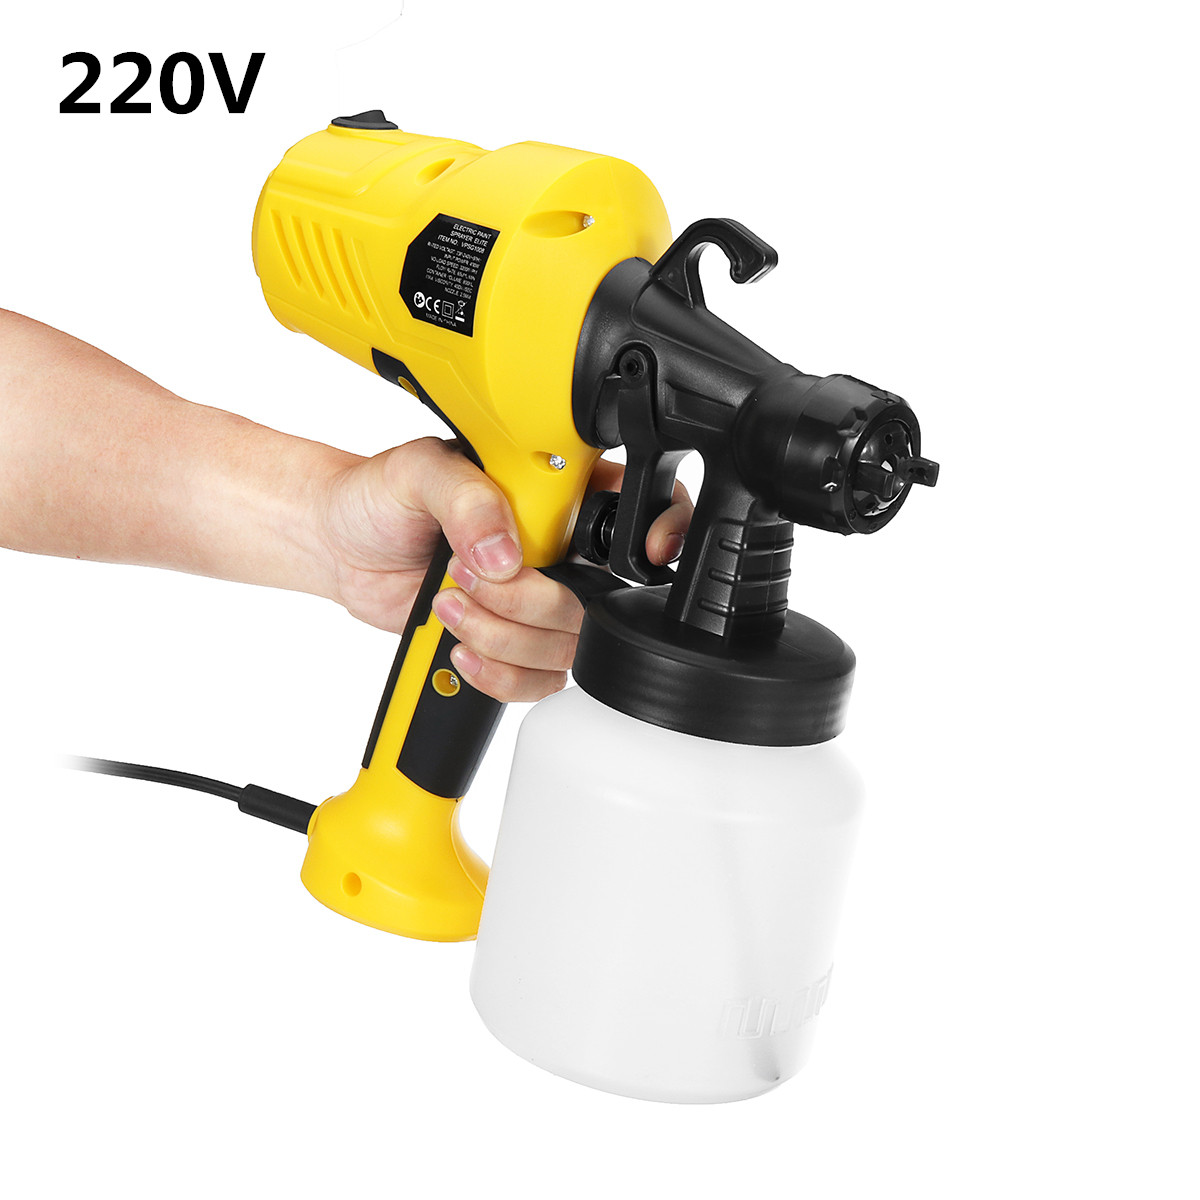 600W Electric Spray Paint Sprayer For Cars Wood Furniture Wall Woodworking 54